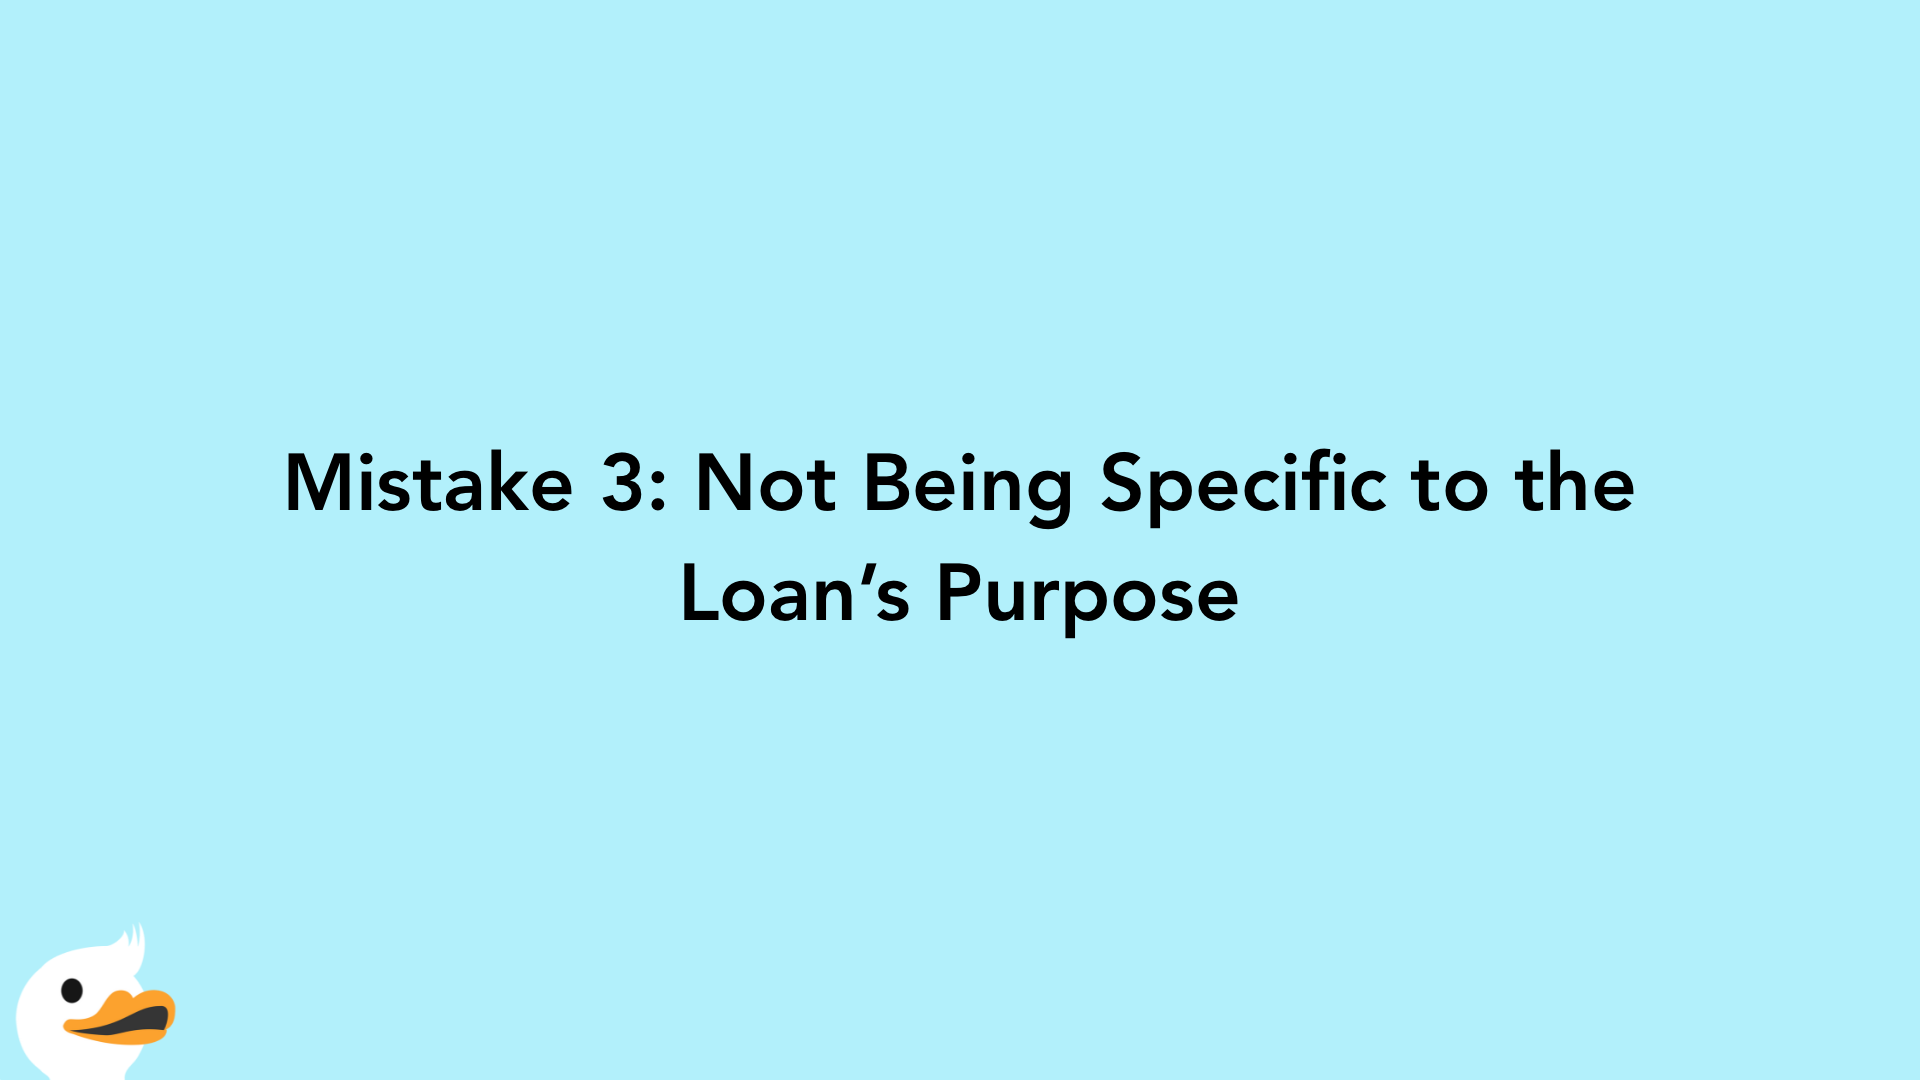 Mistake 3: Not Being Specific to the Loan’s Purpose